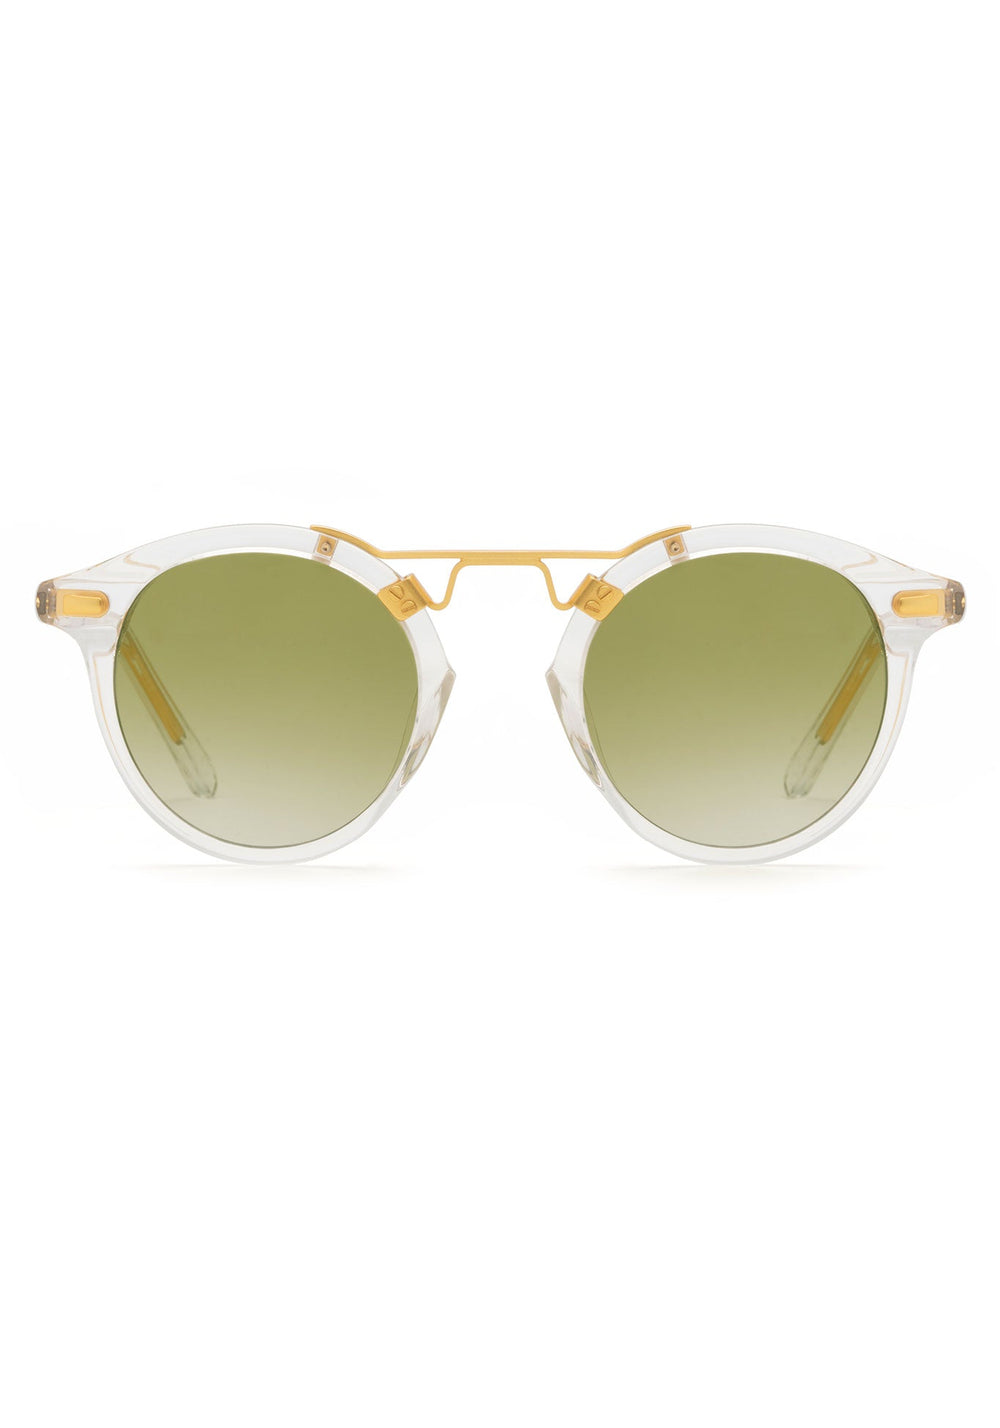 KREWE SUNGLASSES - ST. LOUIS MIRRORED | Crystal 24K + Custom Vanity Tint handcrafted, luxury round clear sunglasses with a double metal bridge and green tinted lenses